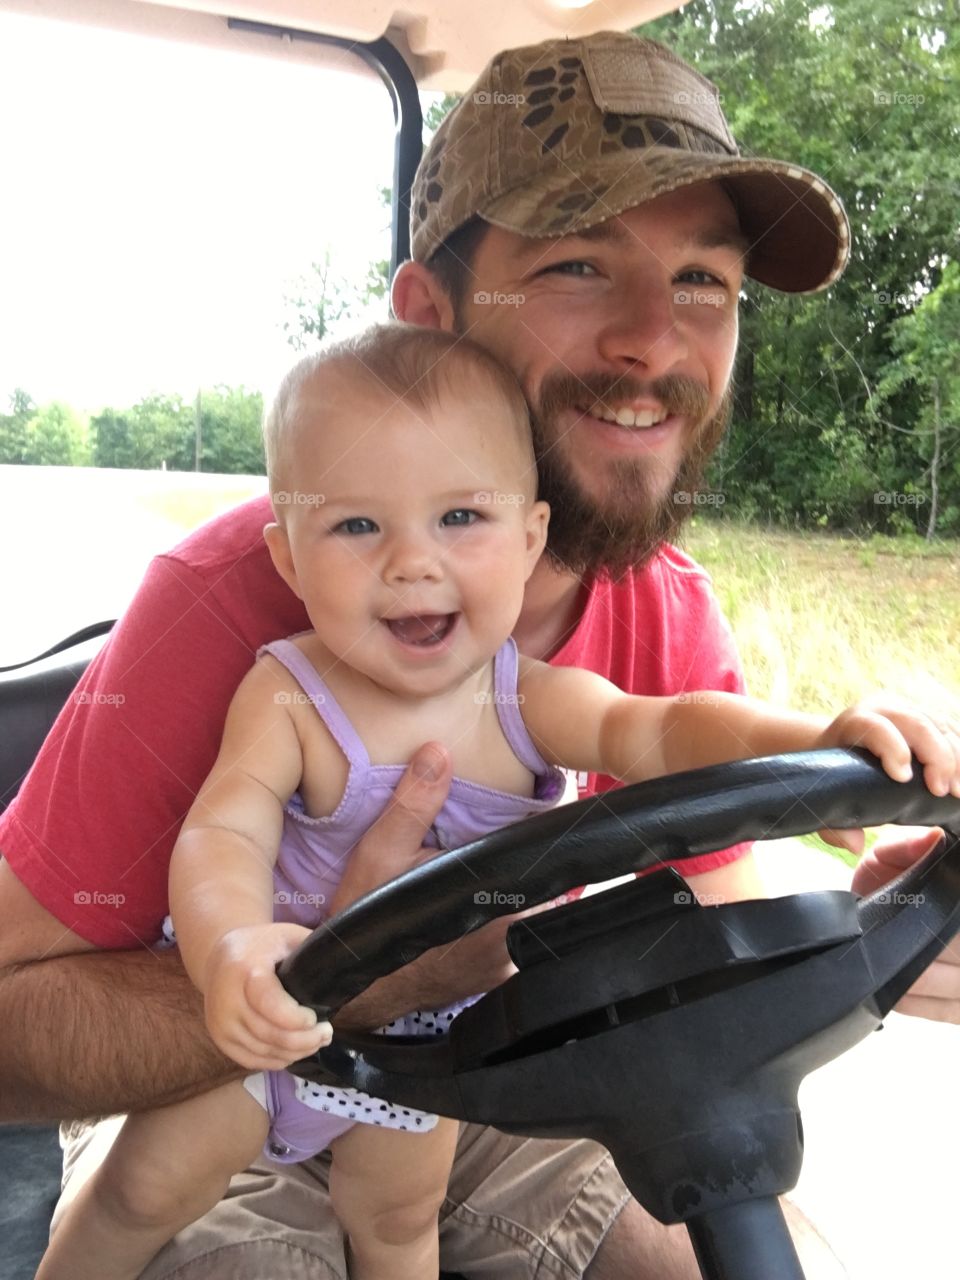 Cute baby with father holding steering wheel